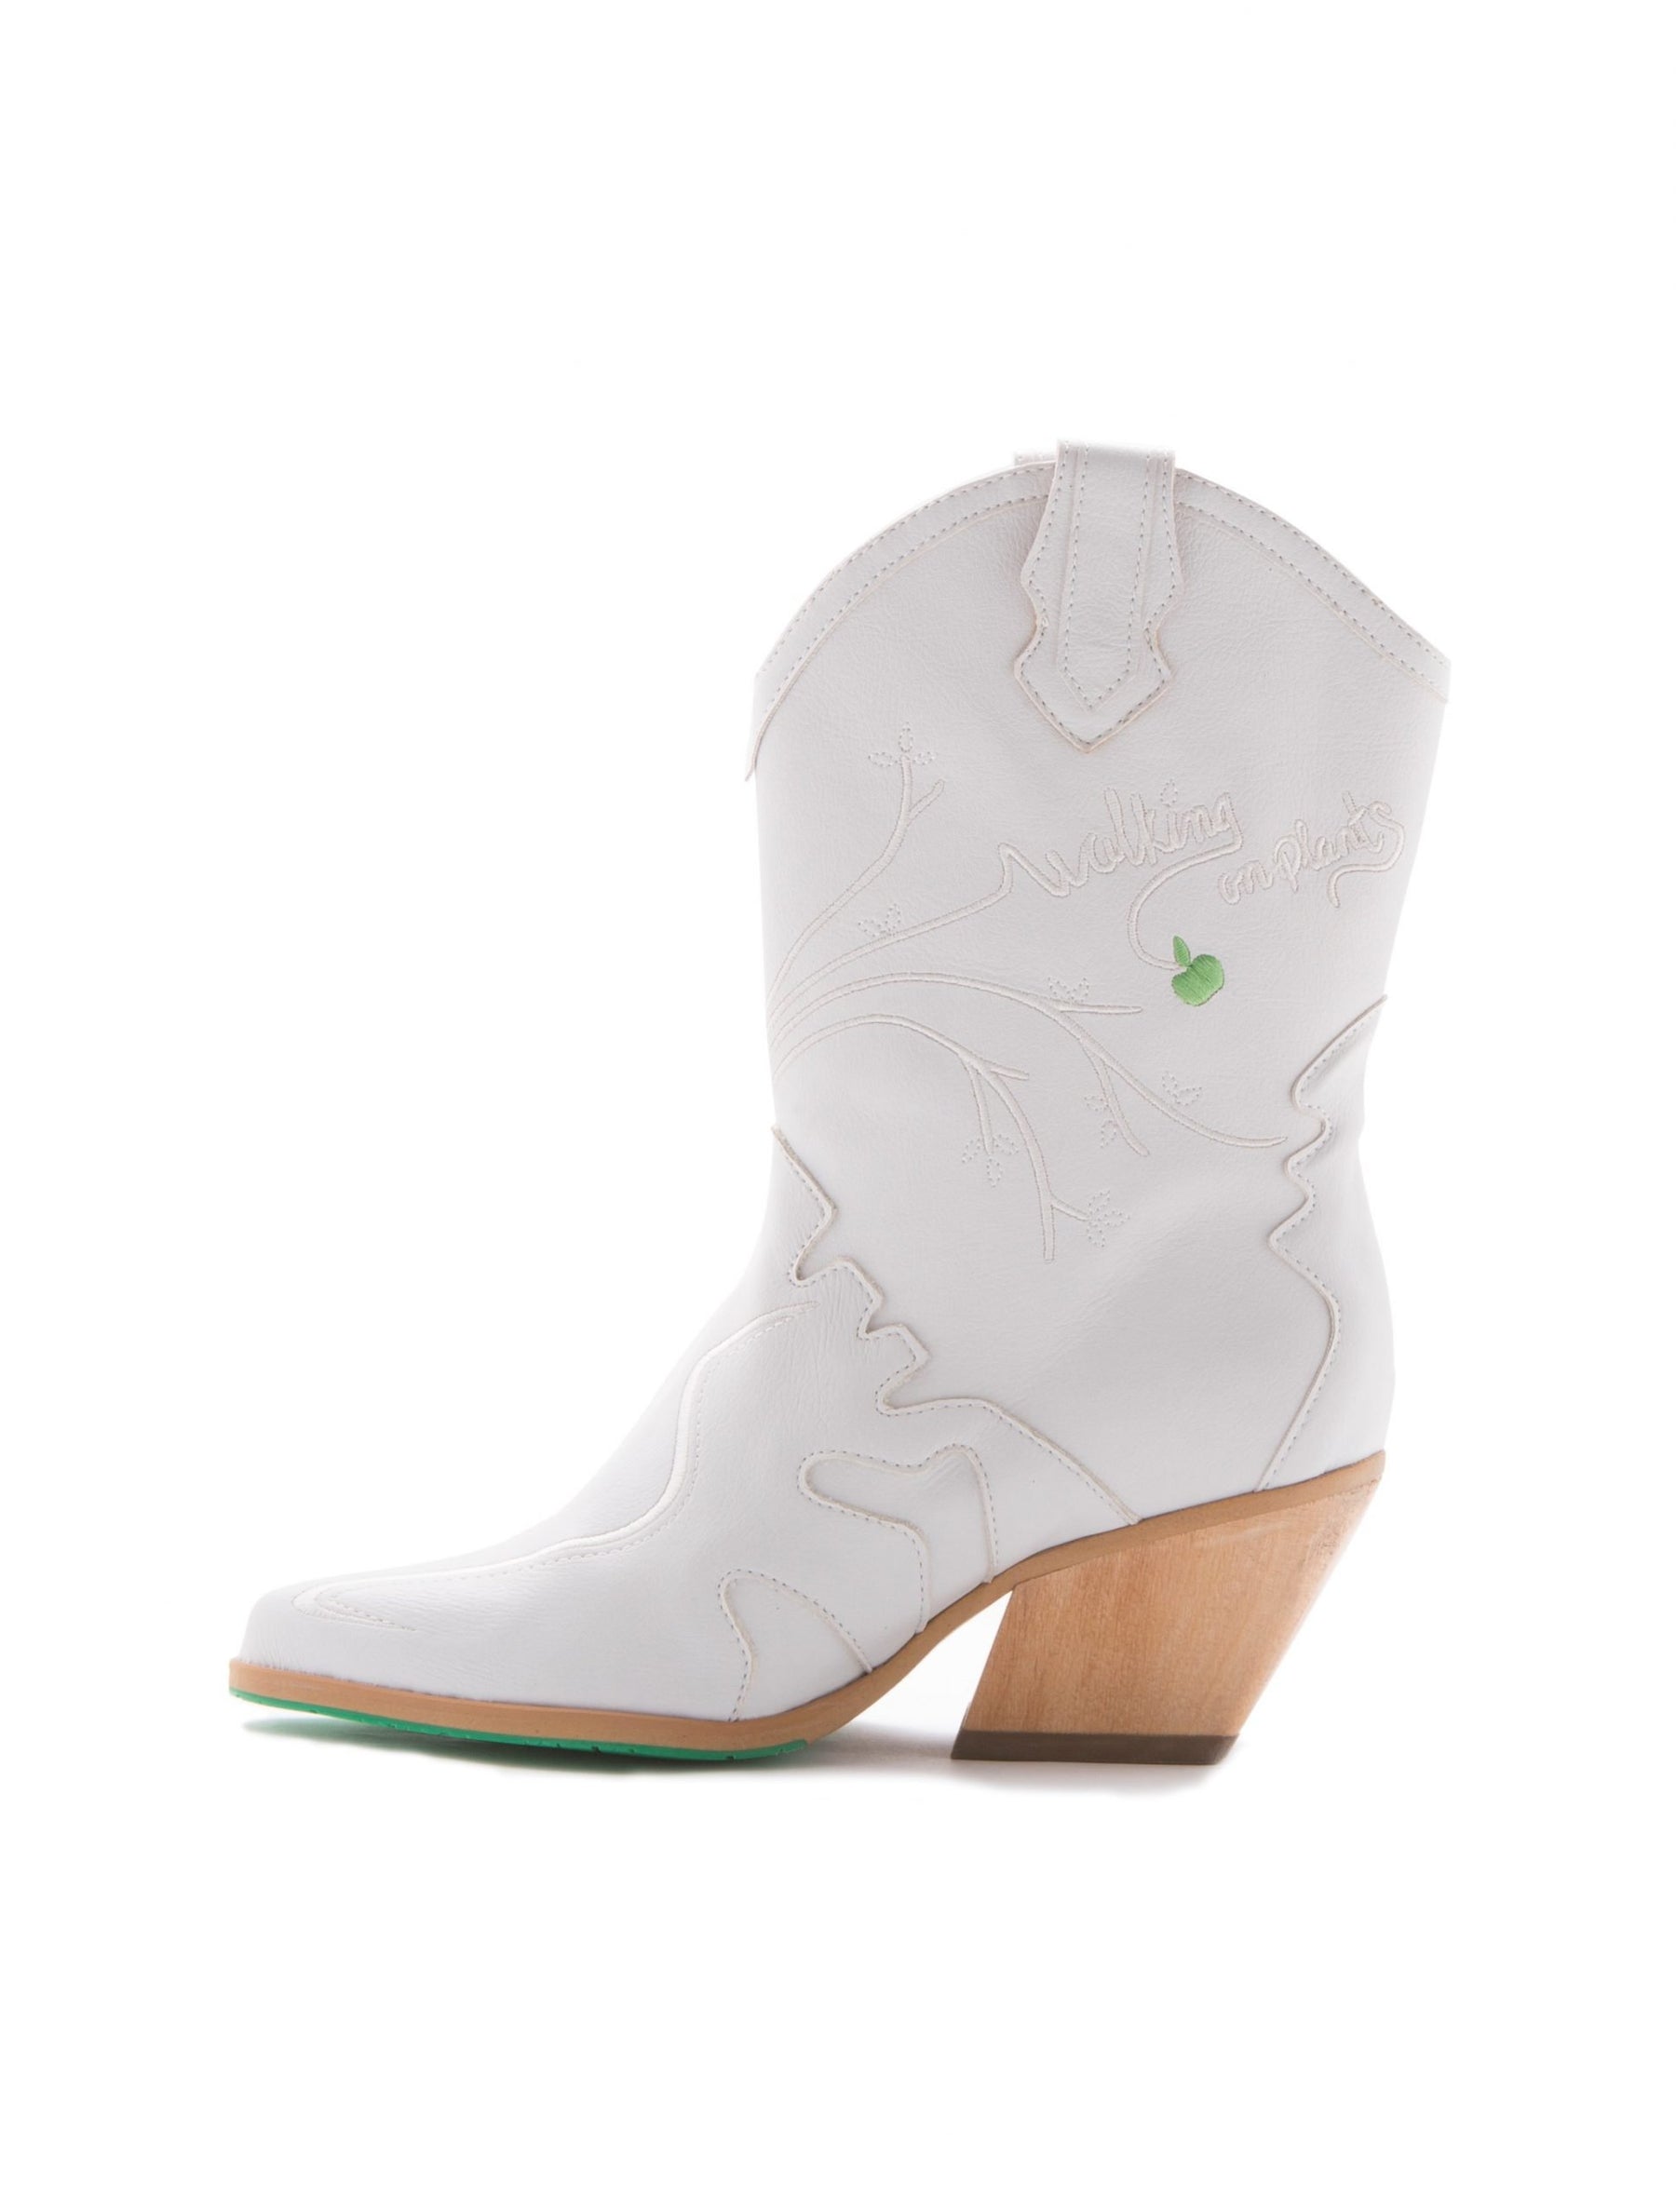 side view white vegan leather cowboy boots with green apple detail